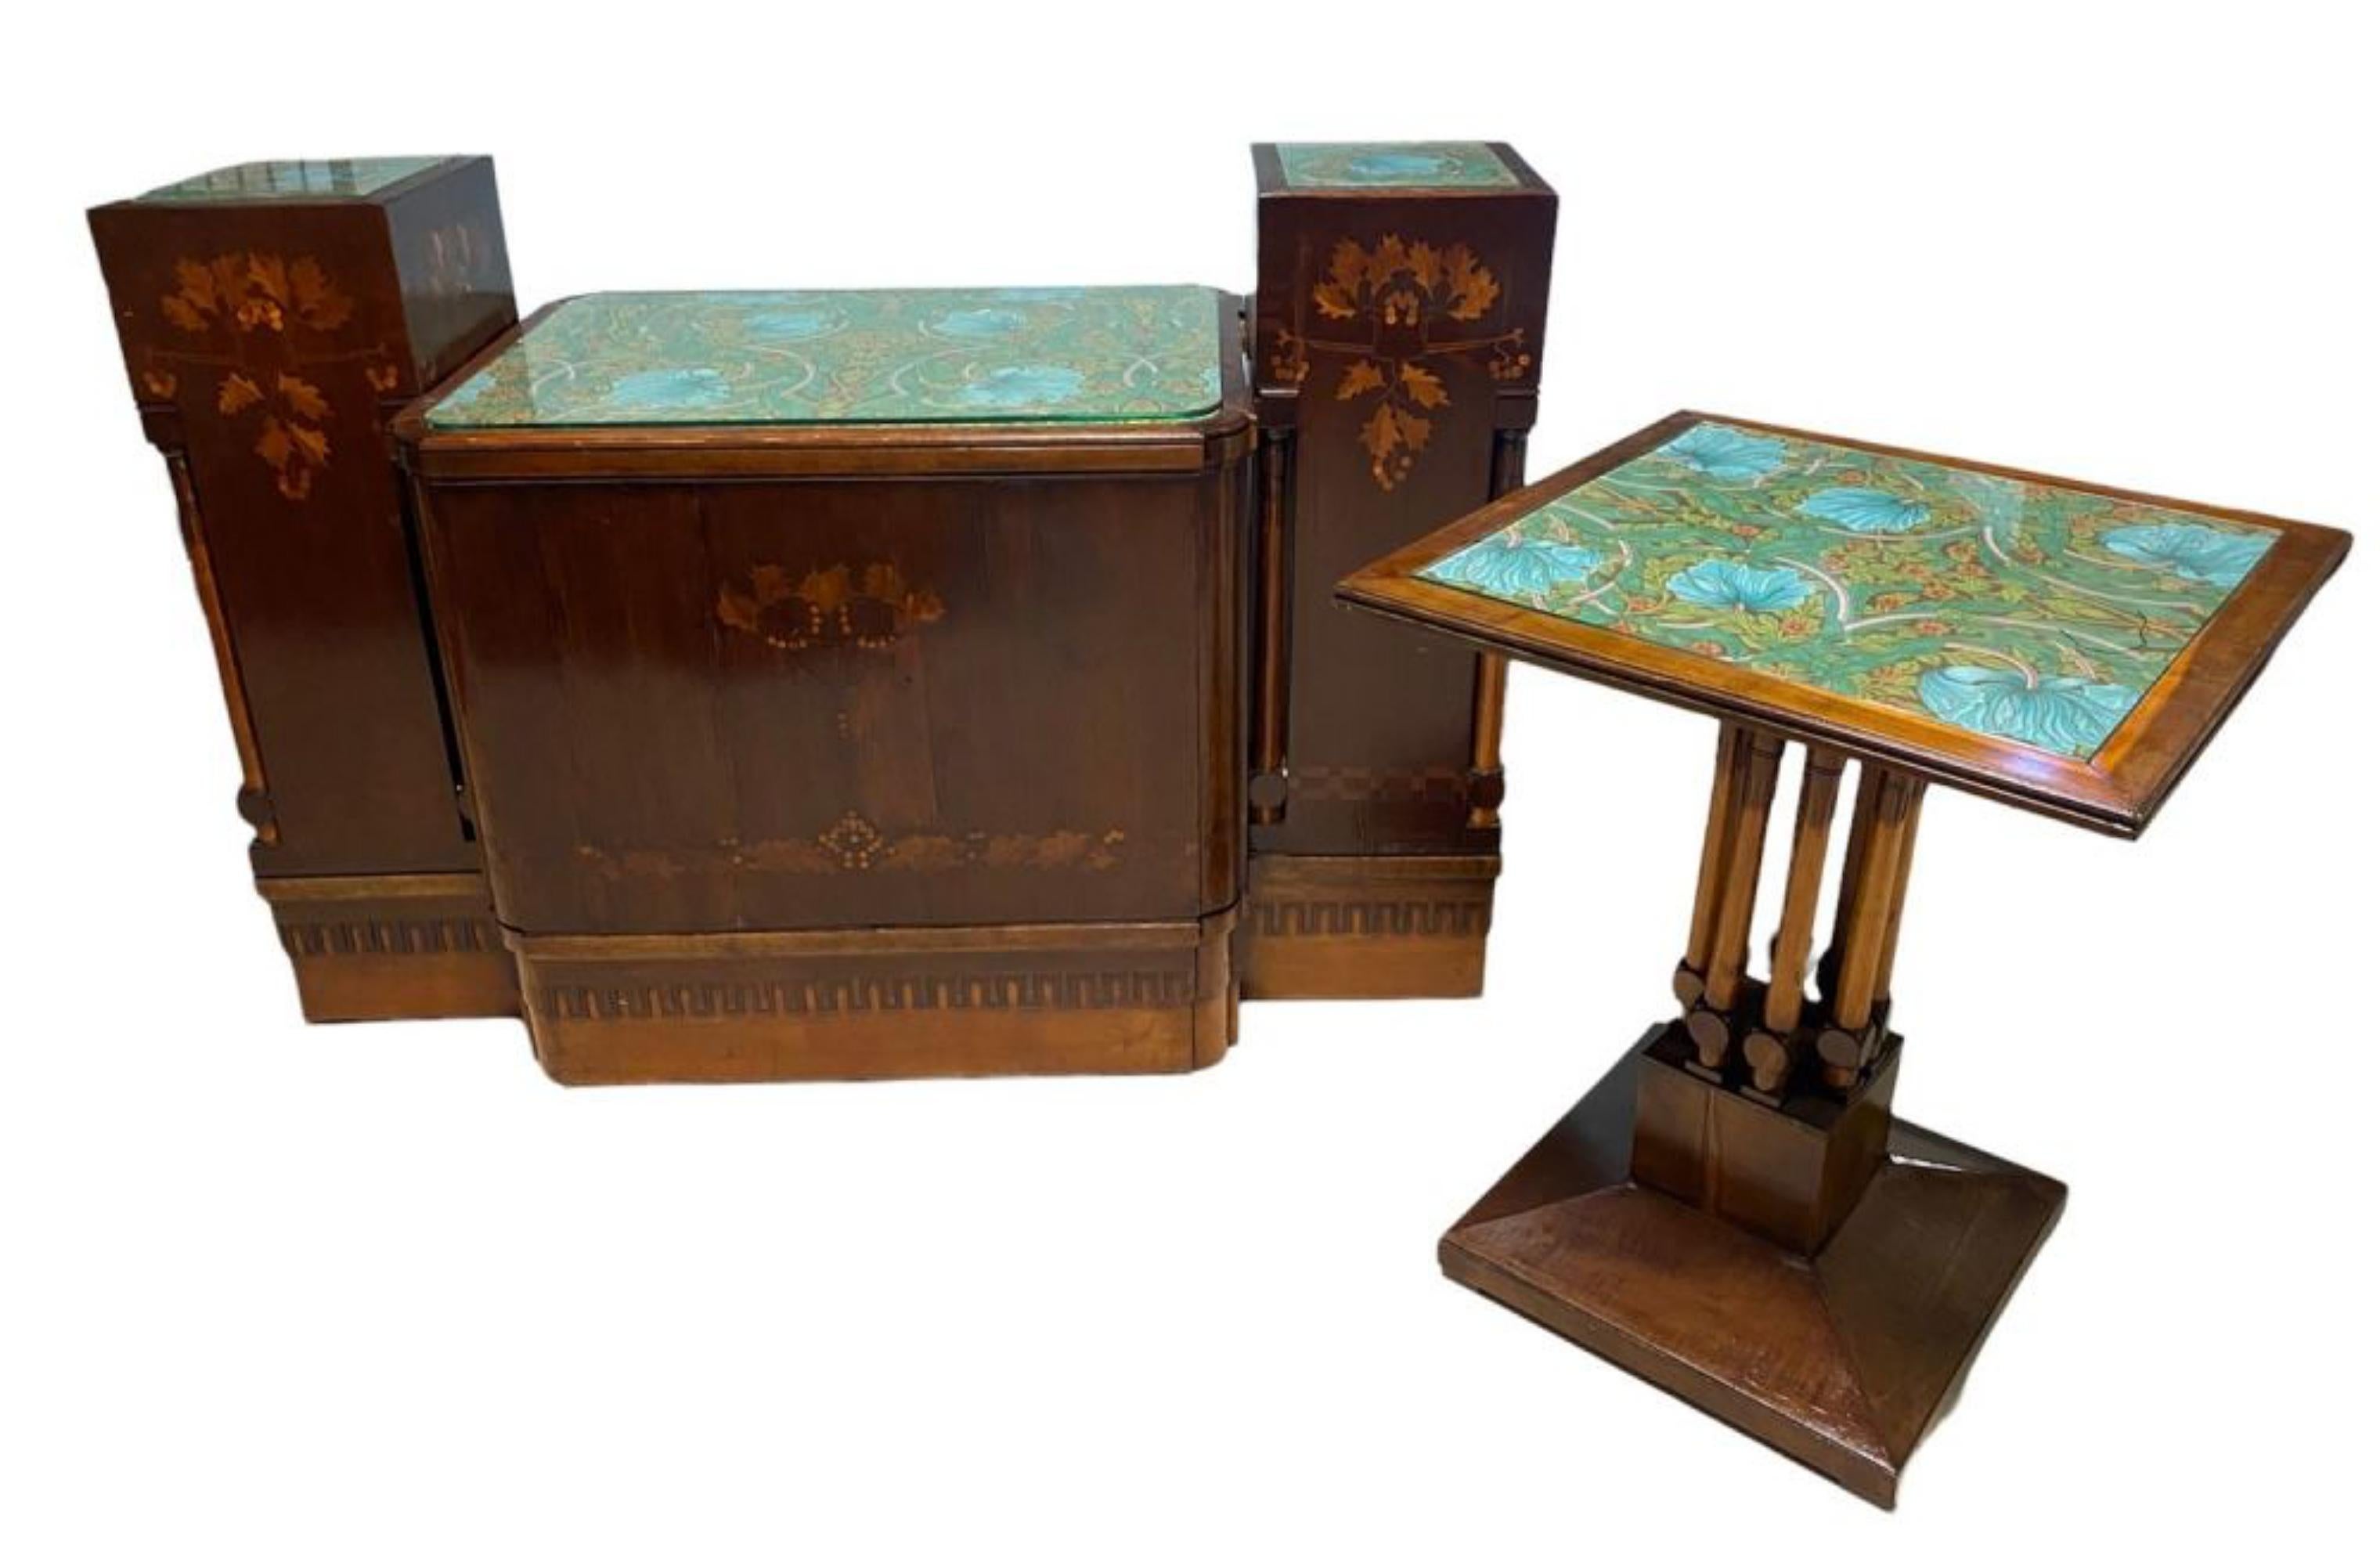 Hand-Crafted Eugenio Quarti 1867-1929 Desk With Twin Table Decorated with Floral Inlays